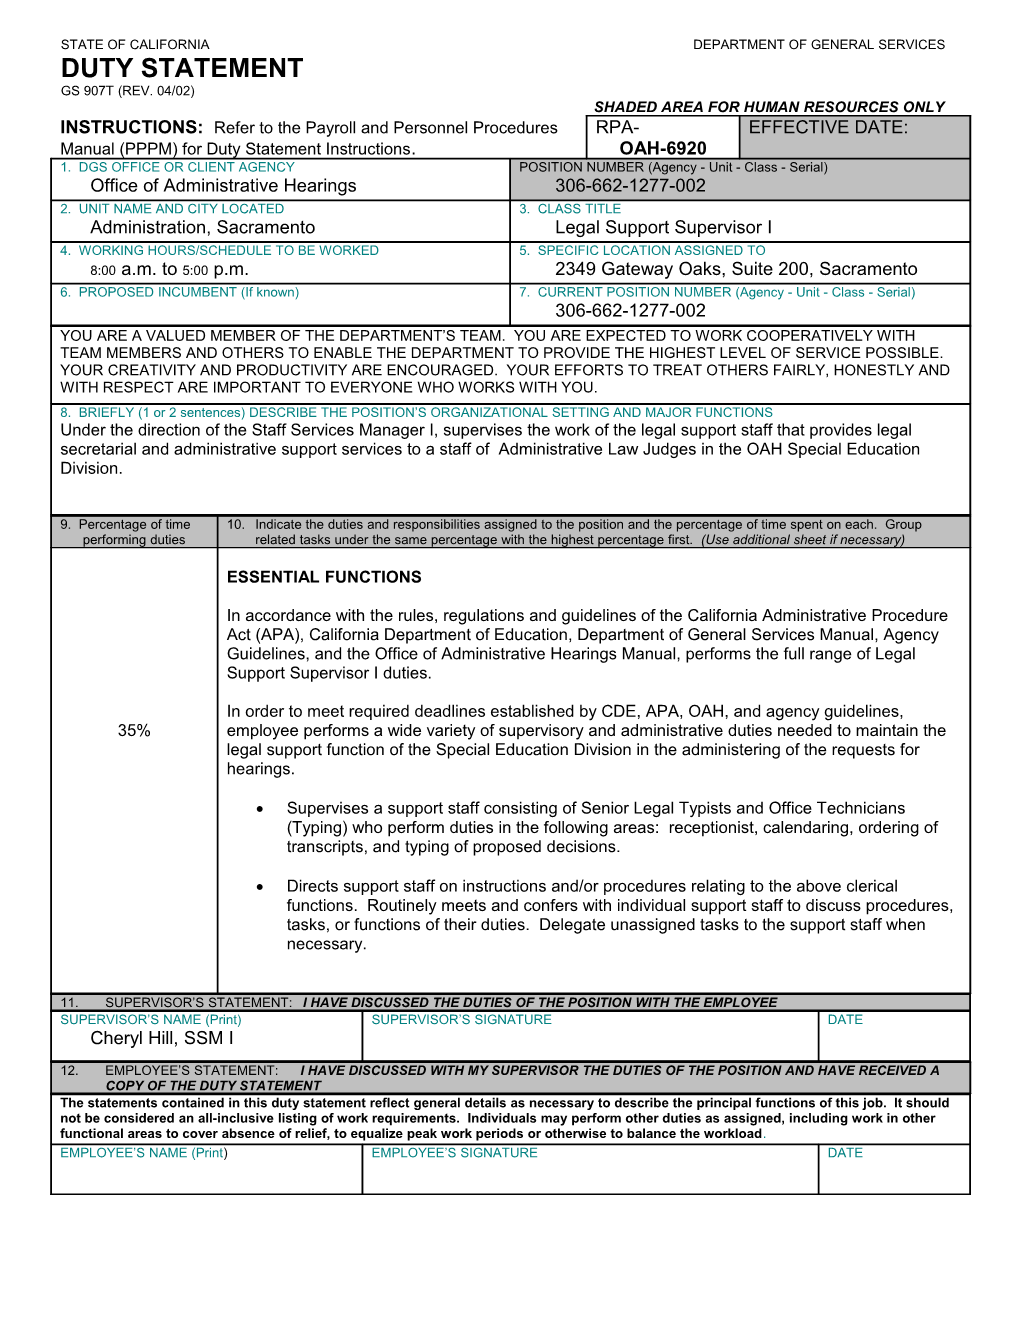 State of California Department of General Services s1